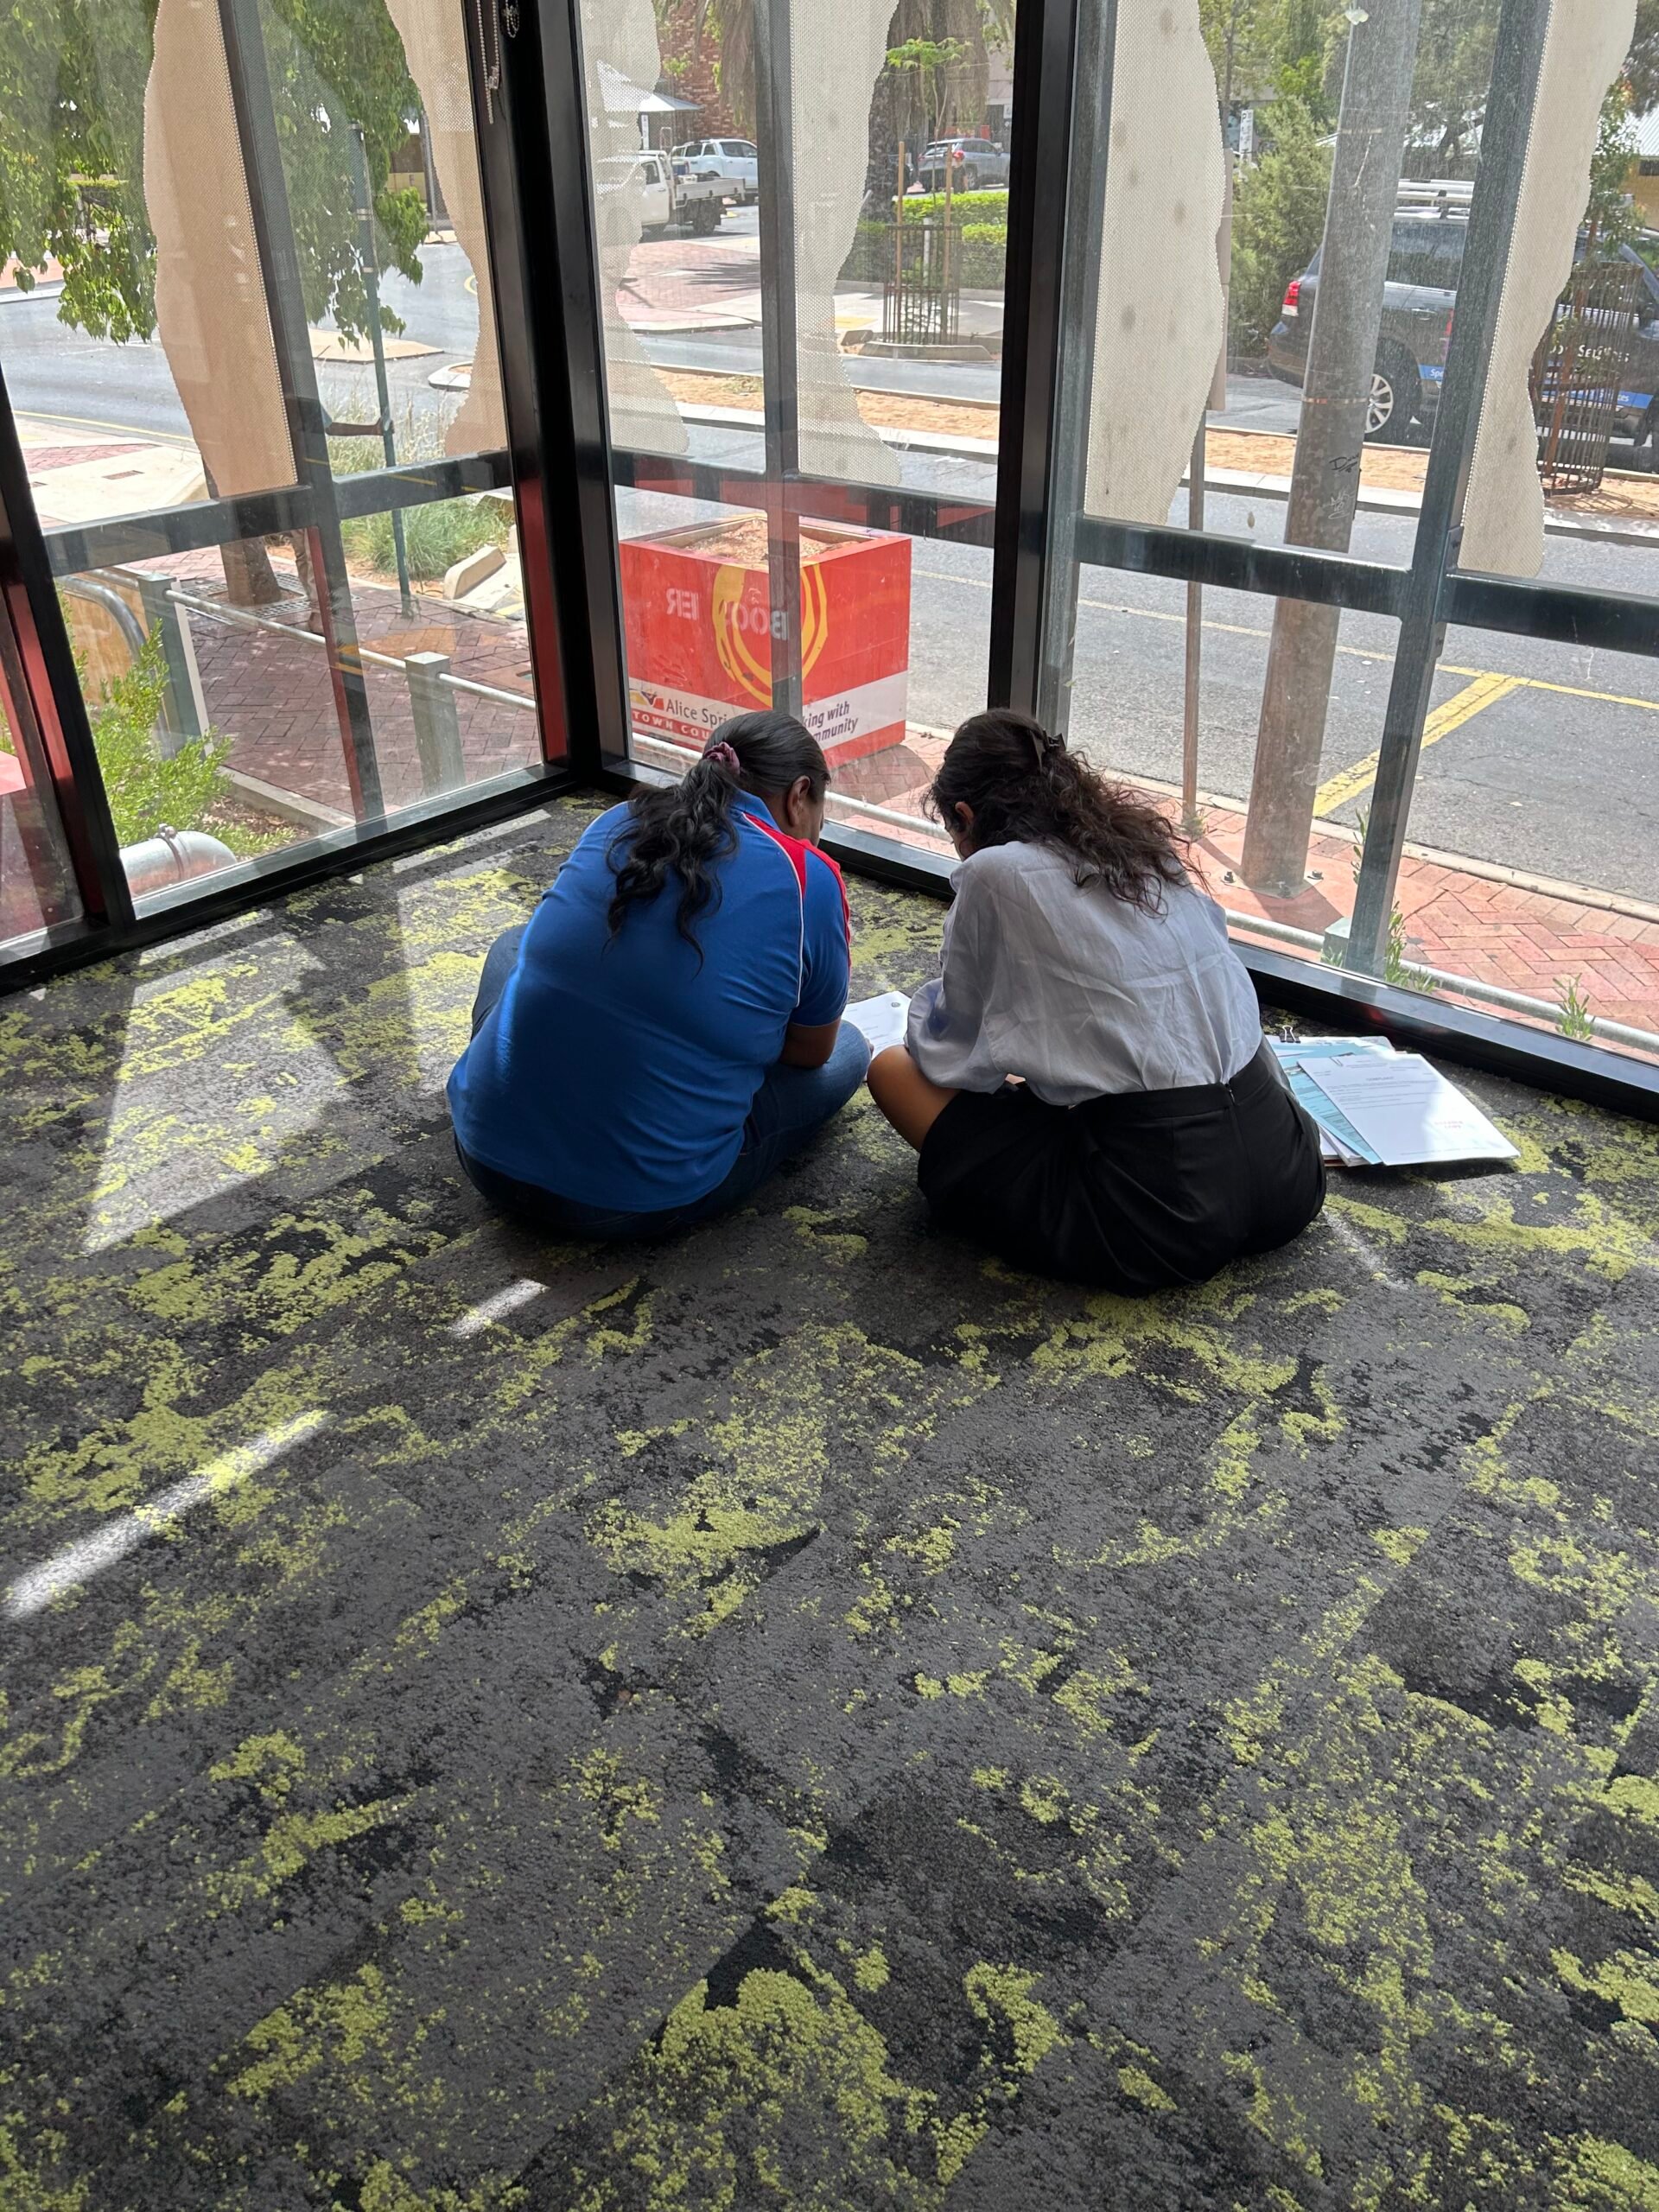 Two people sit on a carpeted floor by large glass windows. One wears a blue shirt, and the other wears a white shirt and black skirt. They are focused on a binder or document in front of them. Outside the windows, trees and parked cars are visible.